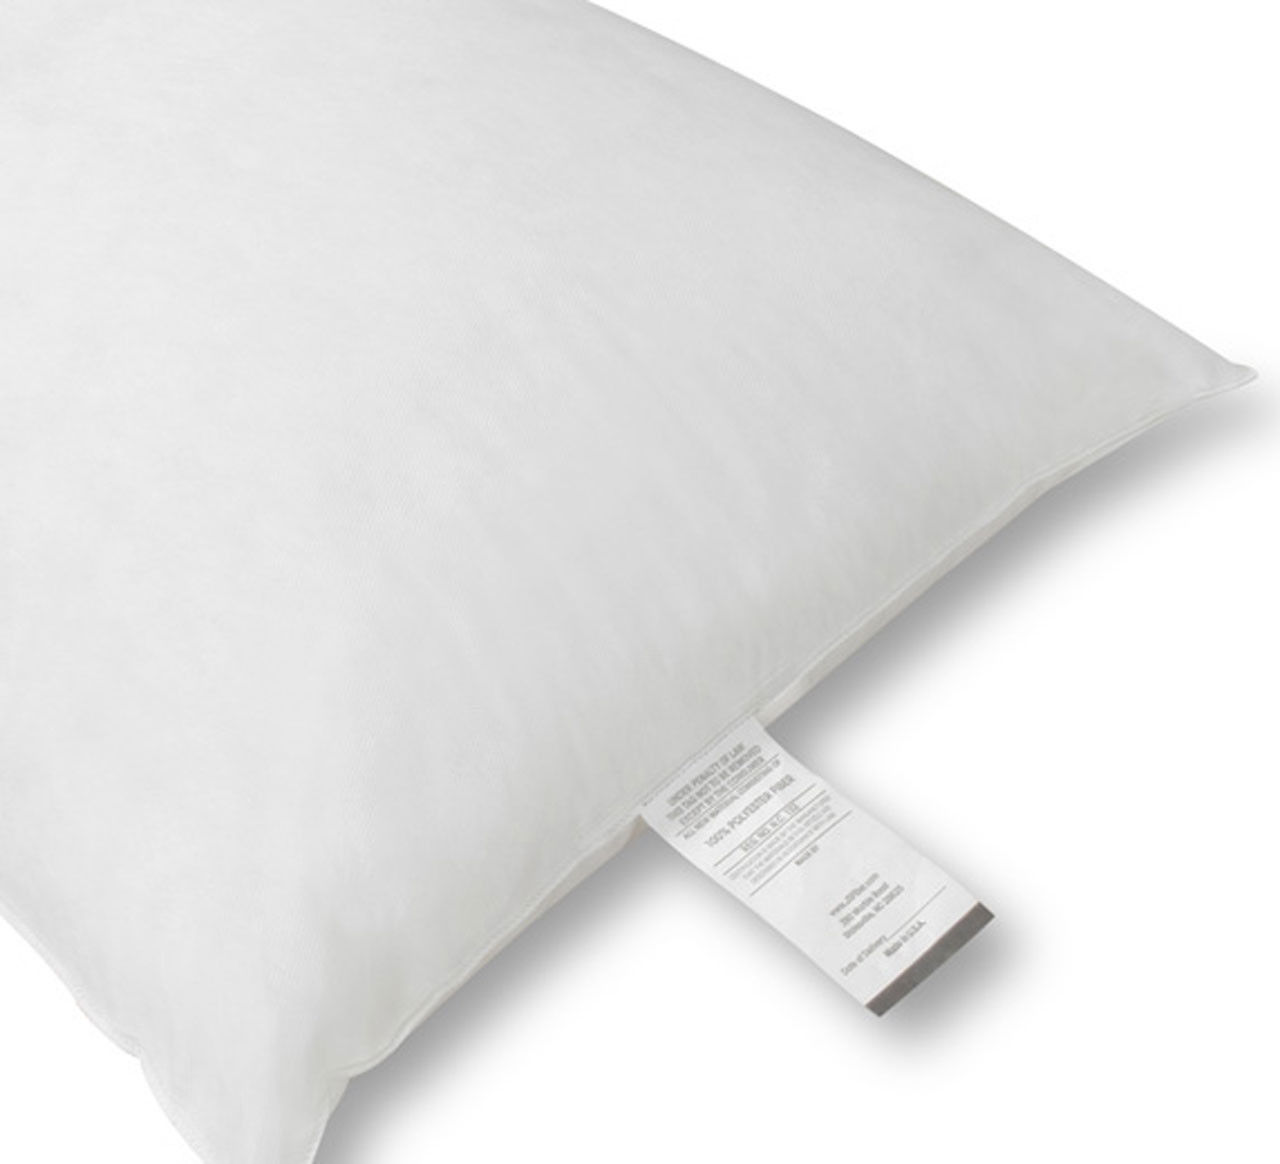 Are Days Inn Pillows suitable for people with allergies?